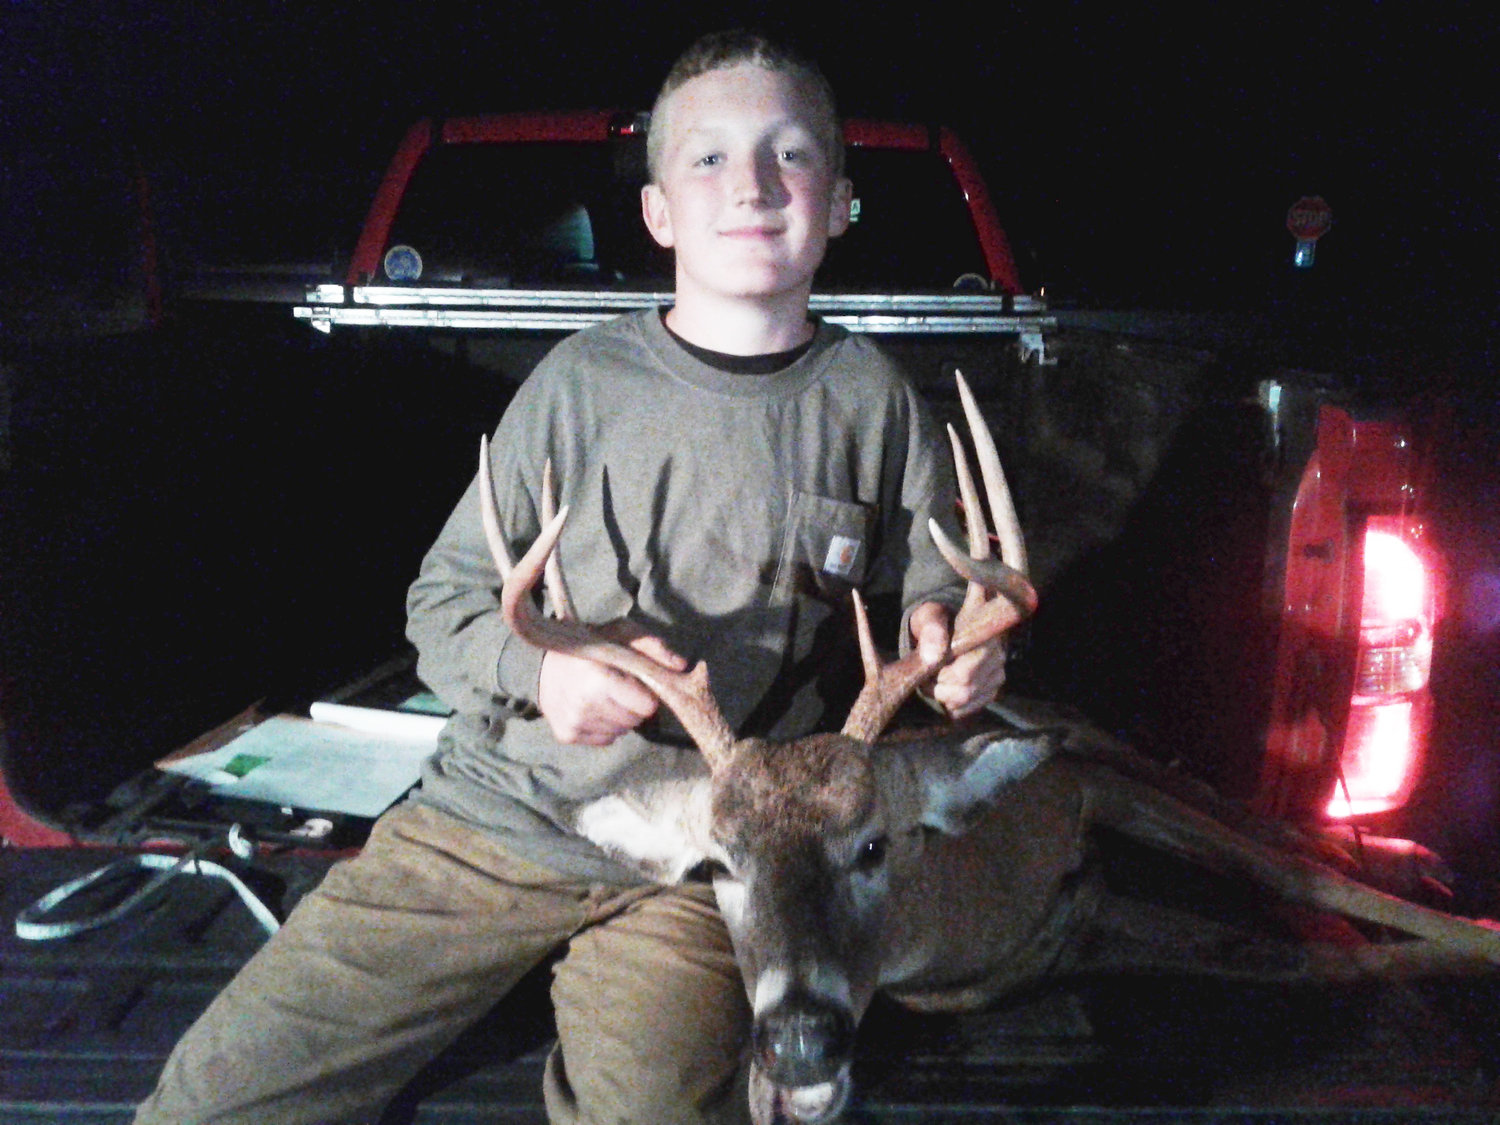 Austin Nystrom of Jeffersonville took a 7-pointer that scored 199.75. The buck weighed 143 pounds